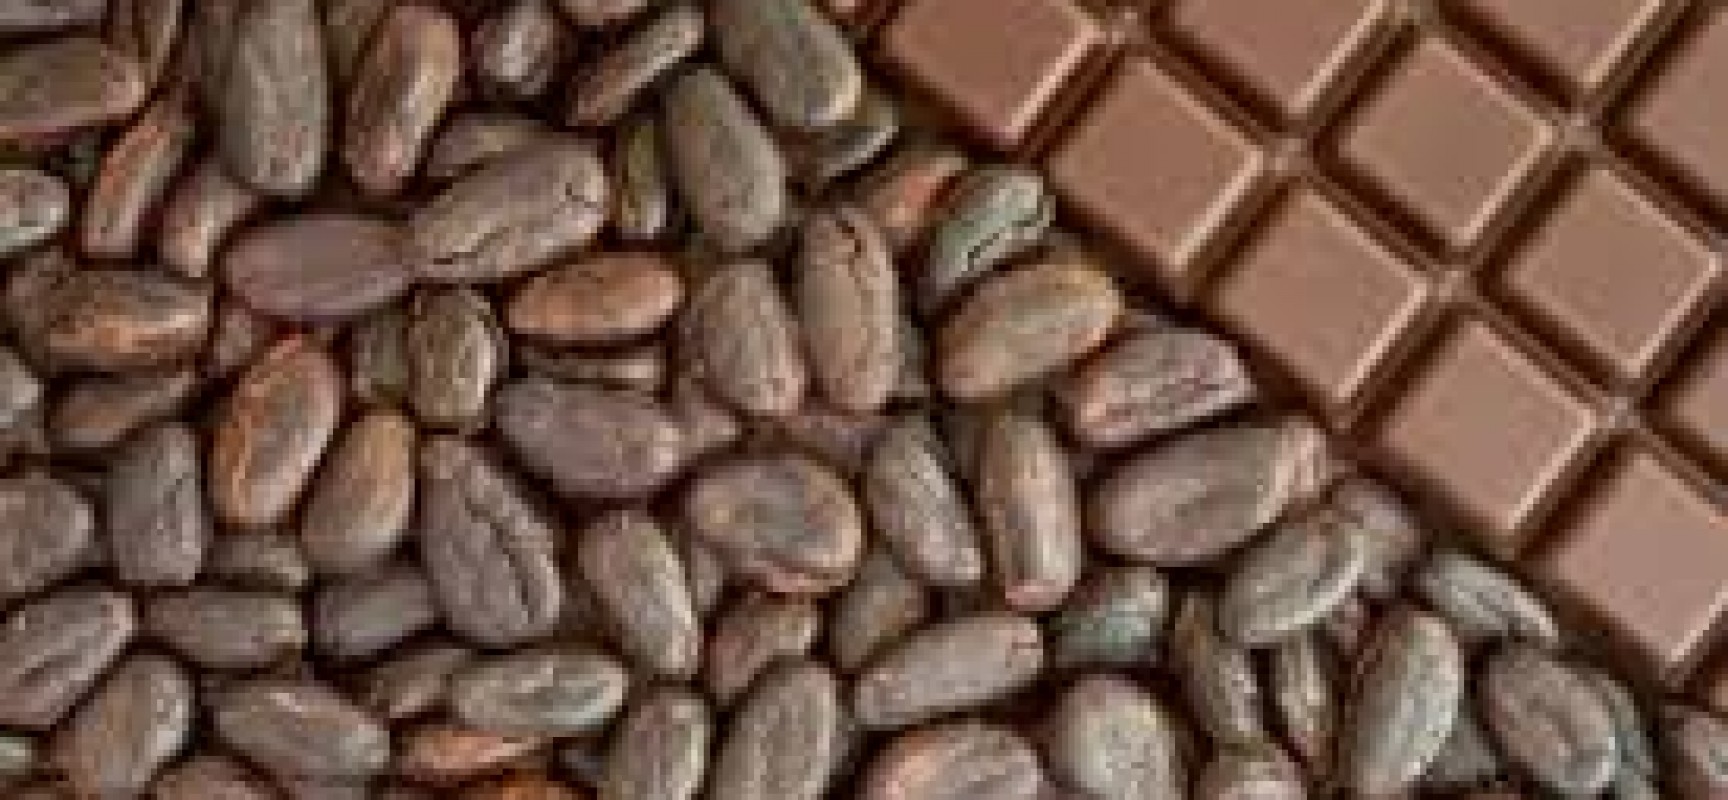 Interesting facts about chocolates